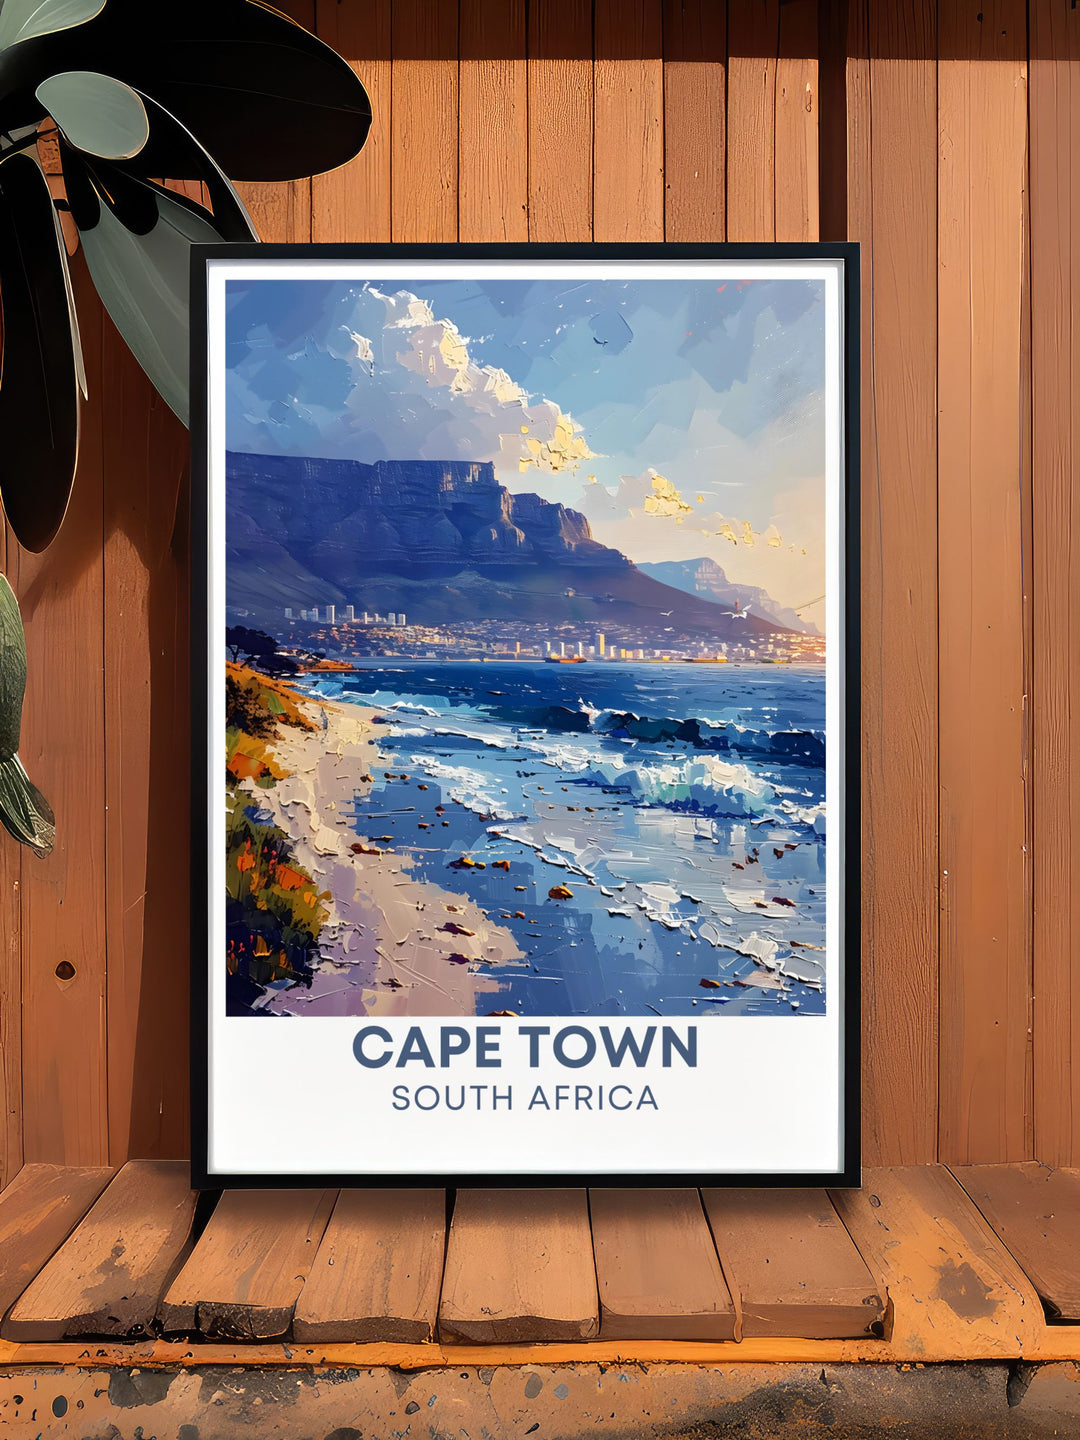 Showcasing the dramatic slopes of Table Mountain and the bustling streets of Cape Town, this travel poster adds a unique touch of natural elegance to your living space.